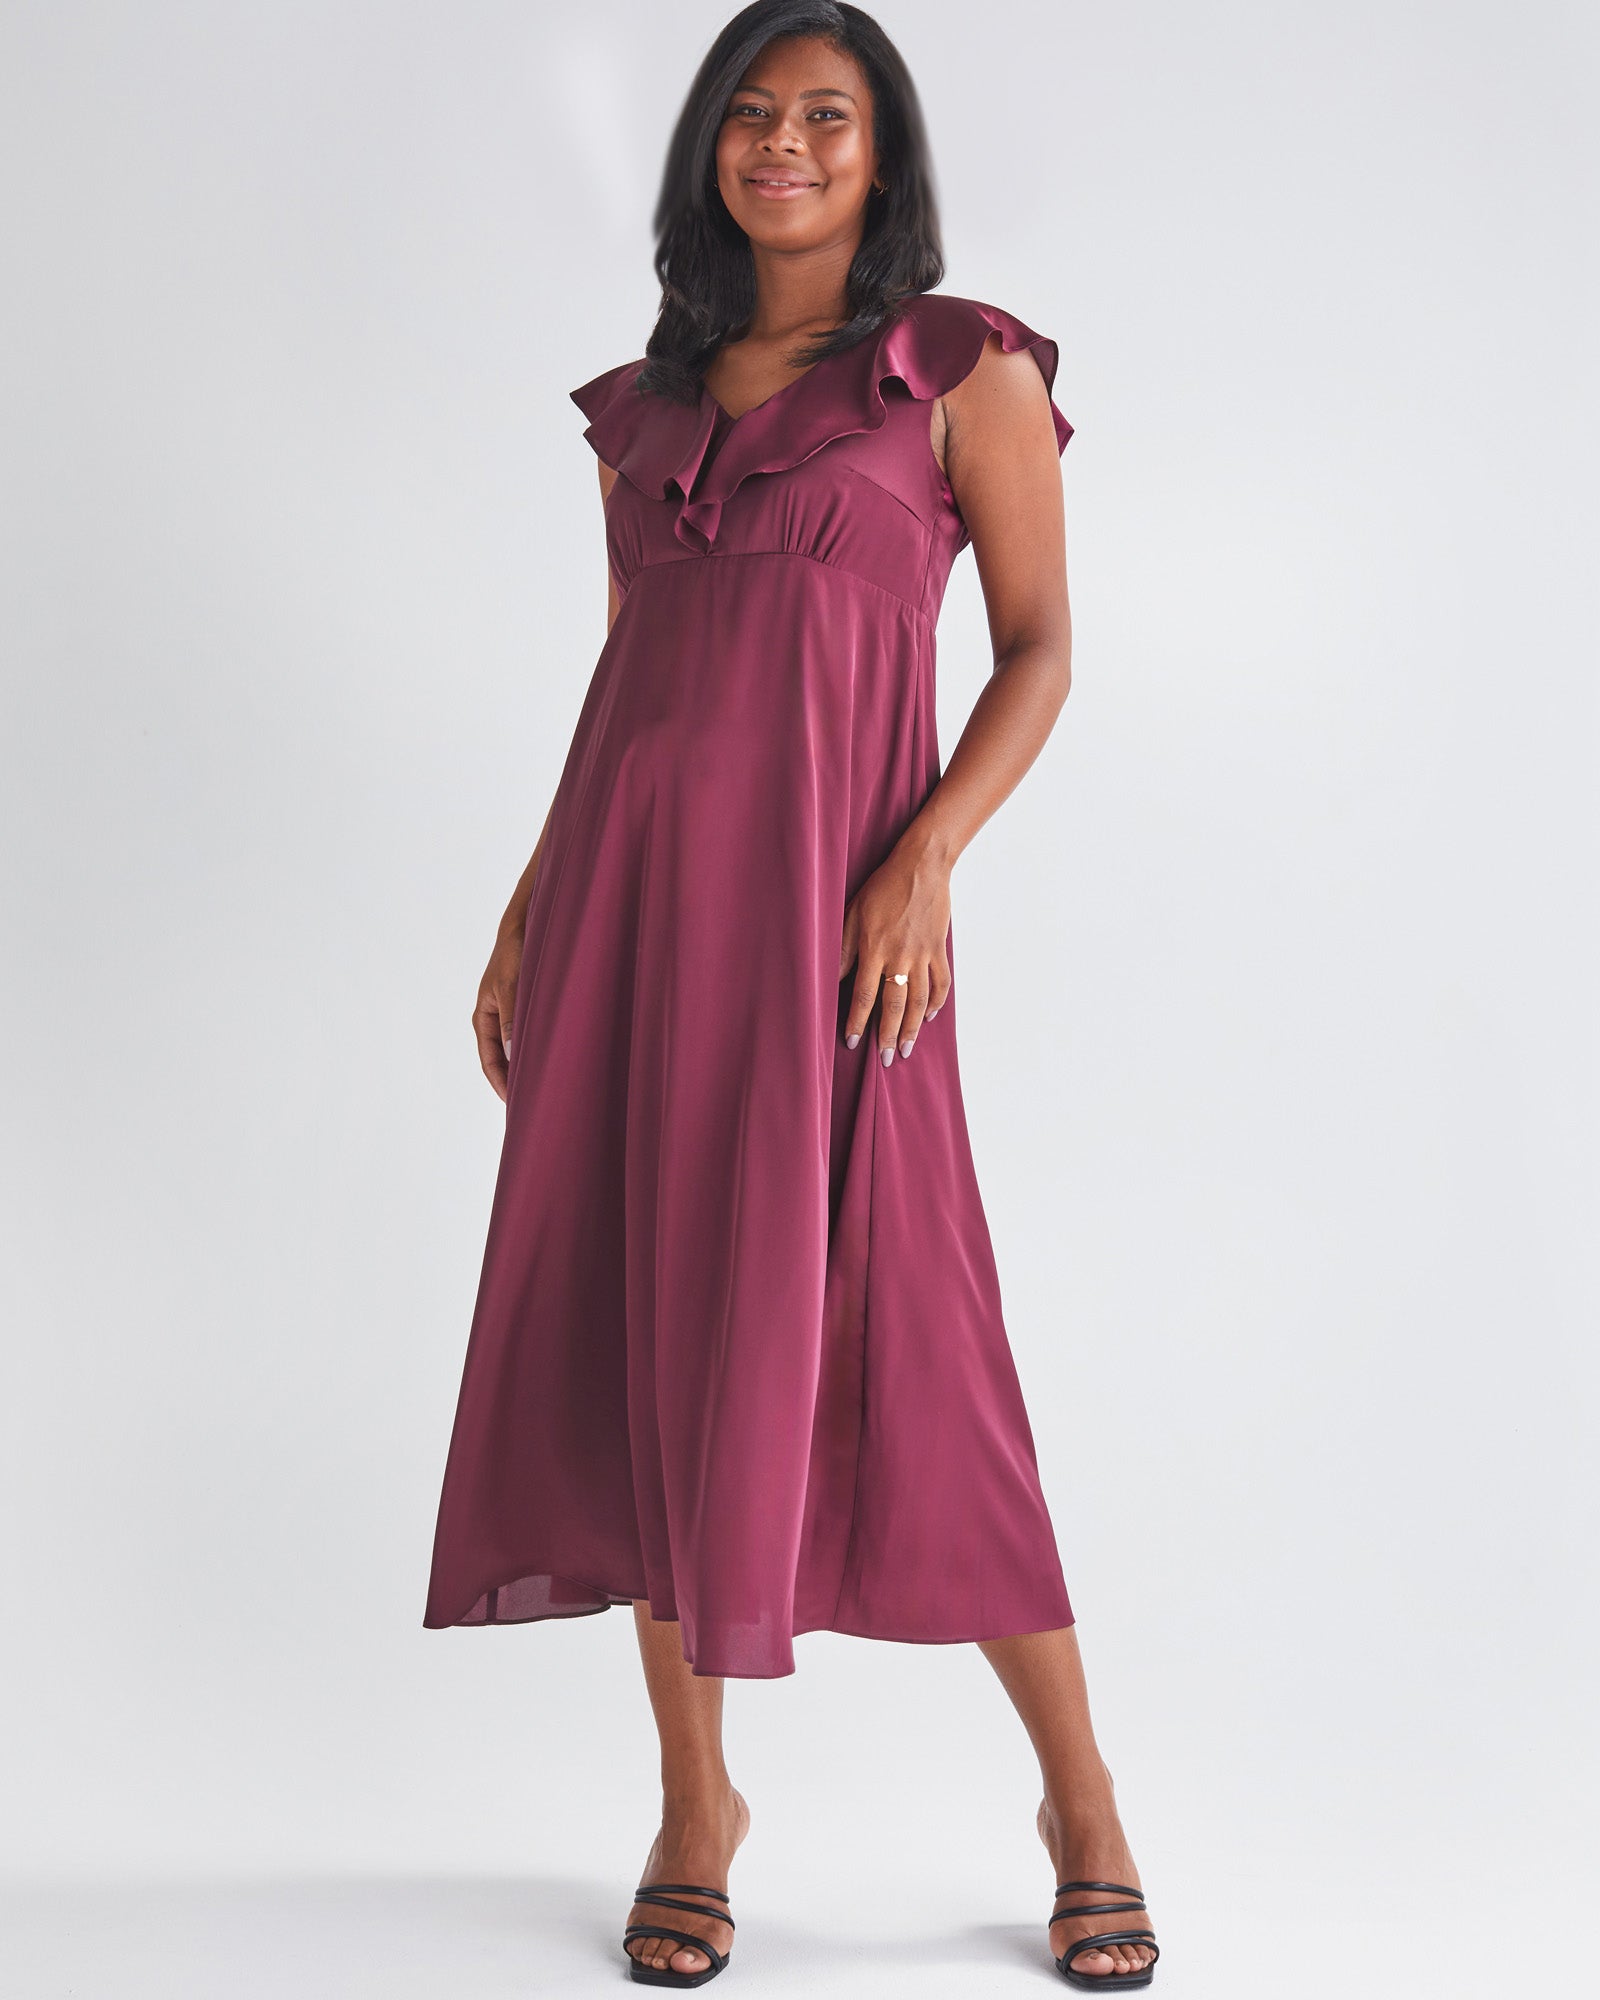 Front View - A Pregnannt Woman Wearing Mika Maternity Evening Ruffle Dress in Wine from Angel Maternity.